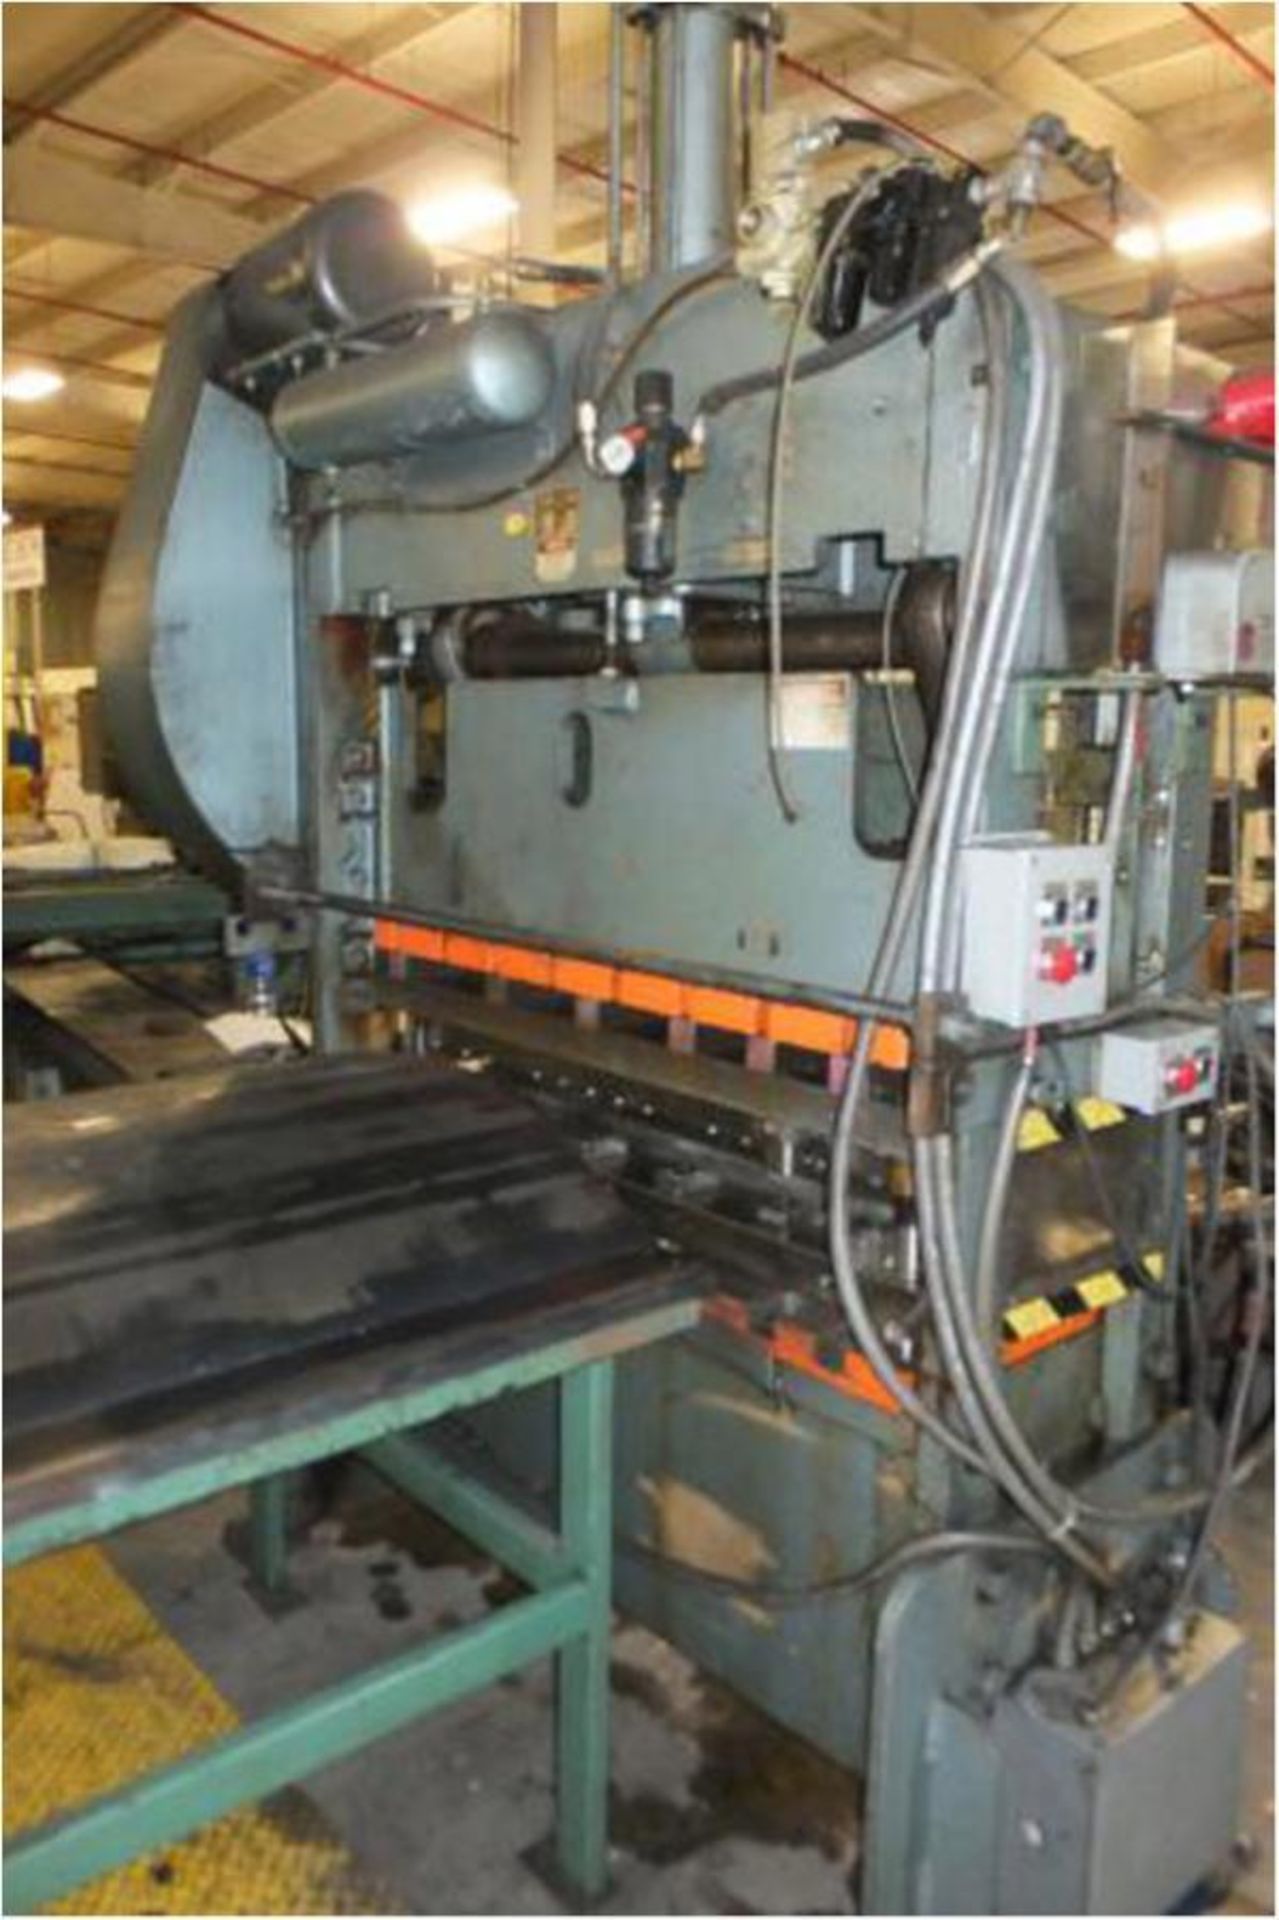 Heim Straight Side Double Crank Press, 40 Ton x 56" x 22", Mdl: S2-40, S/N: H-3668 (6932P) ( - Image 4 of 4